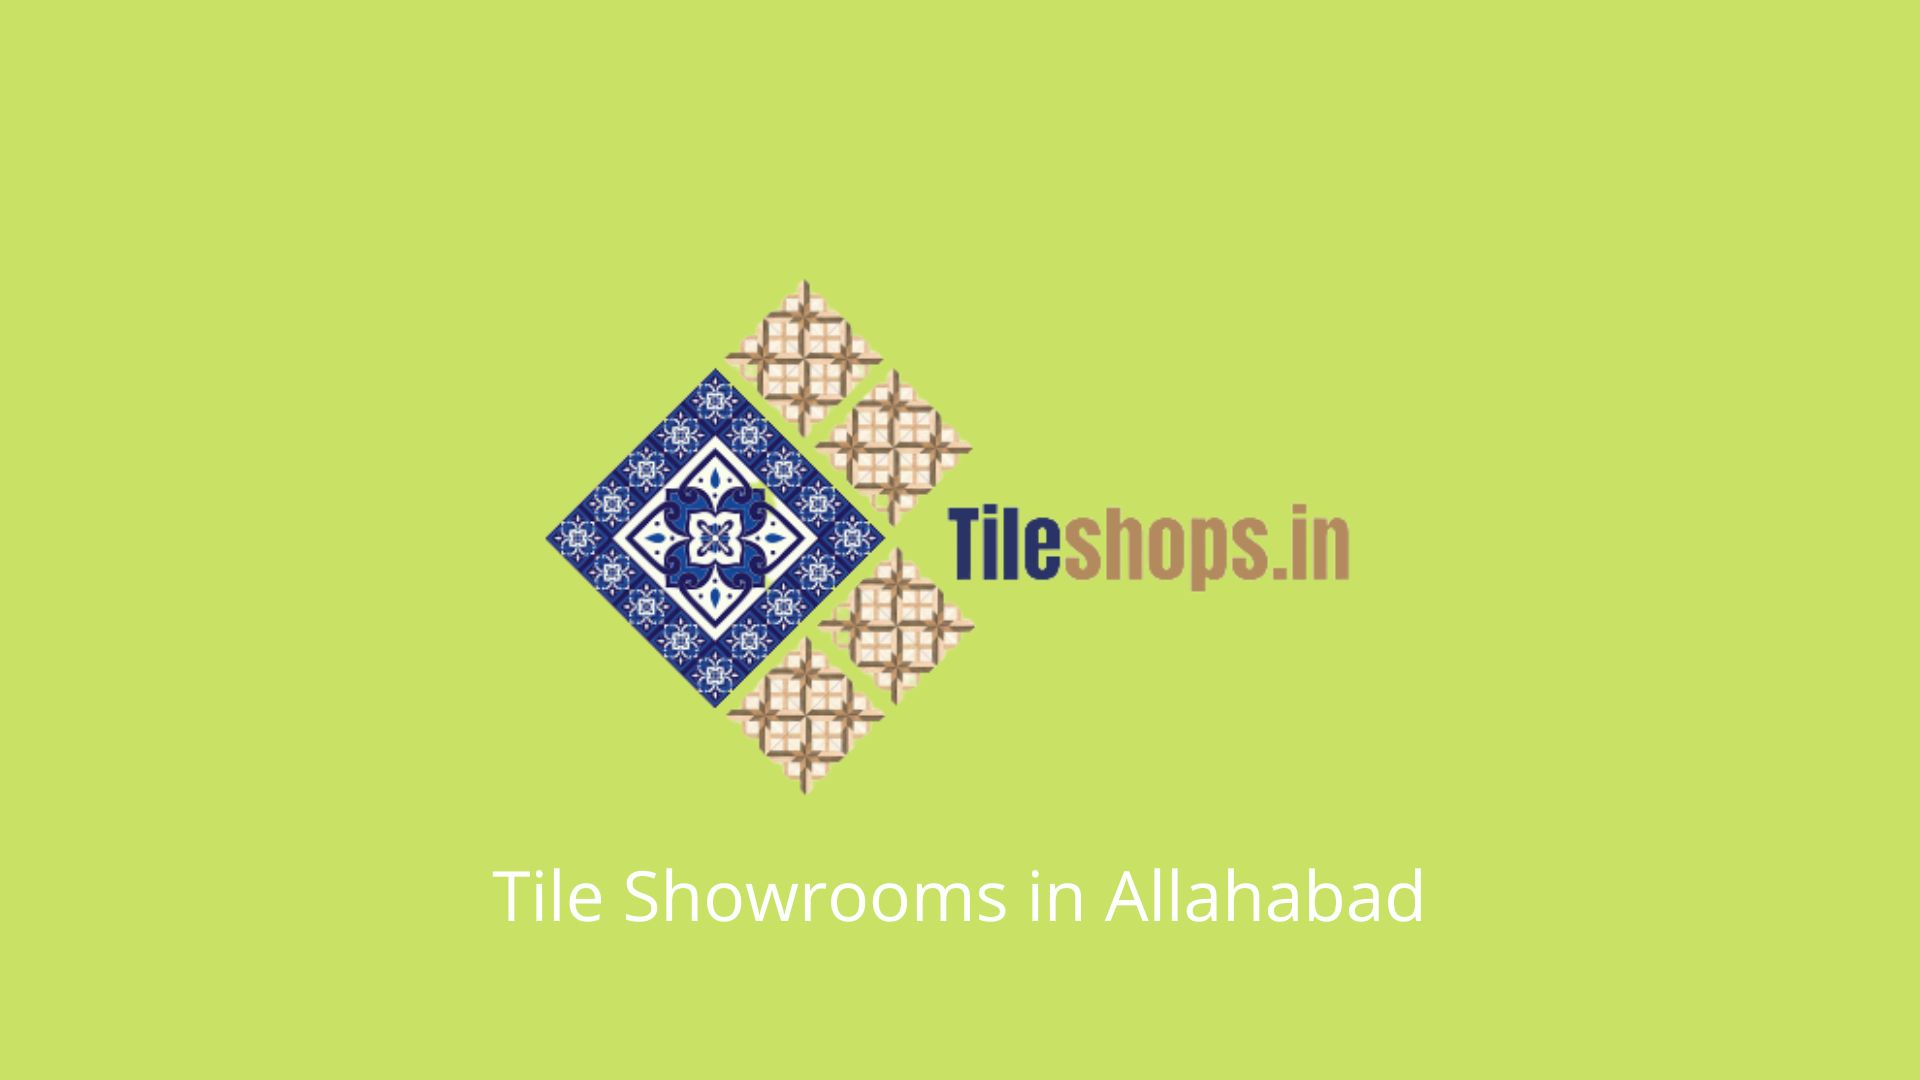 Tile Showrooms in Allahabad